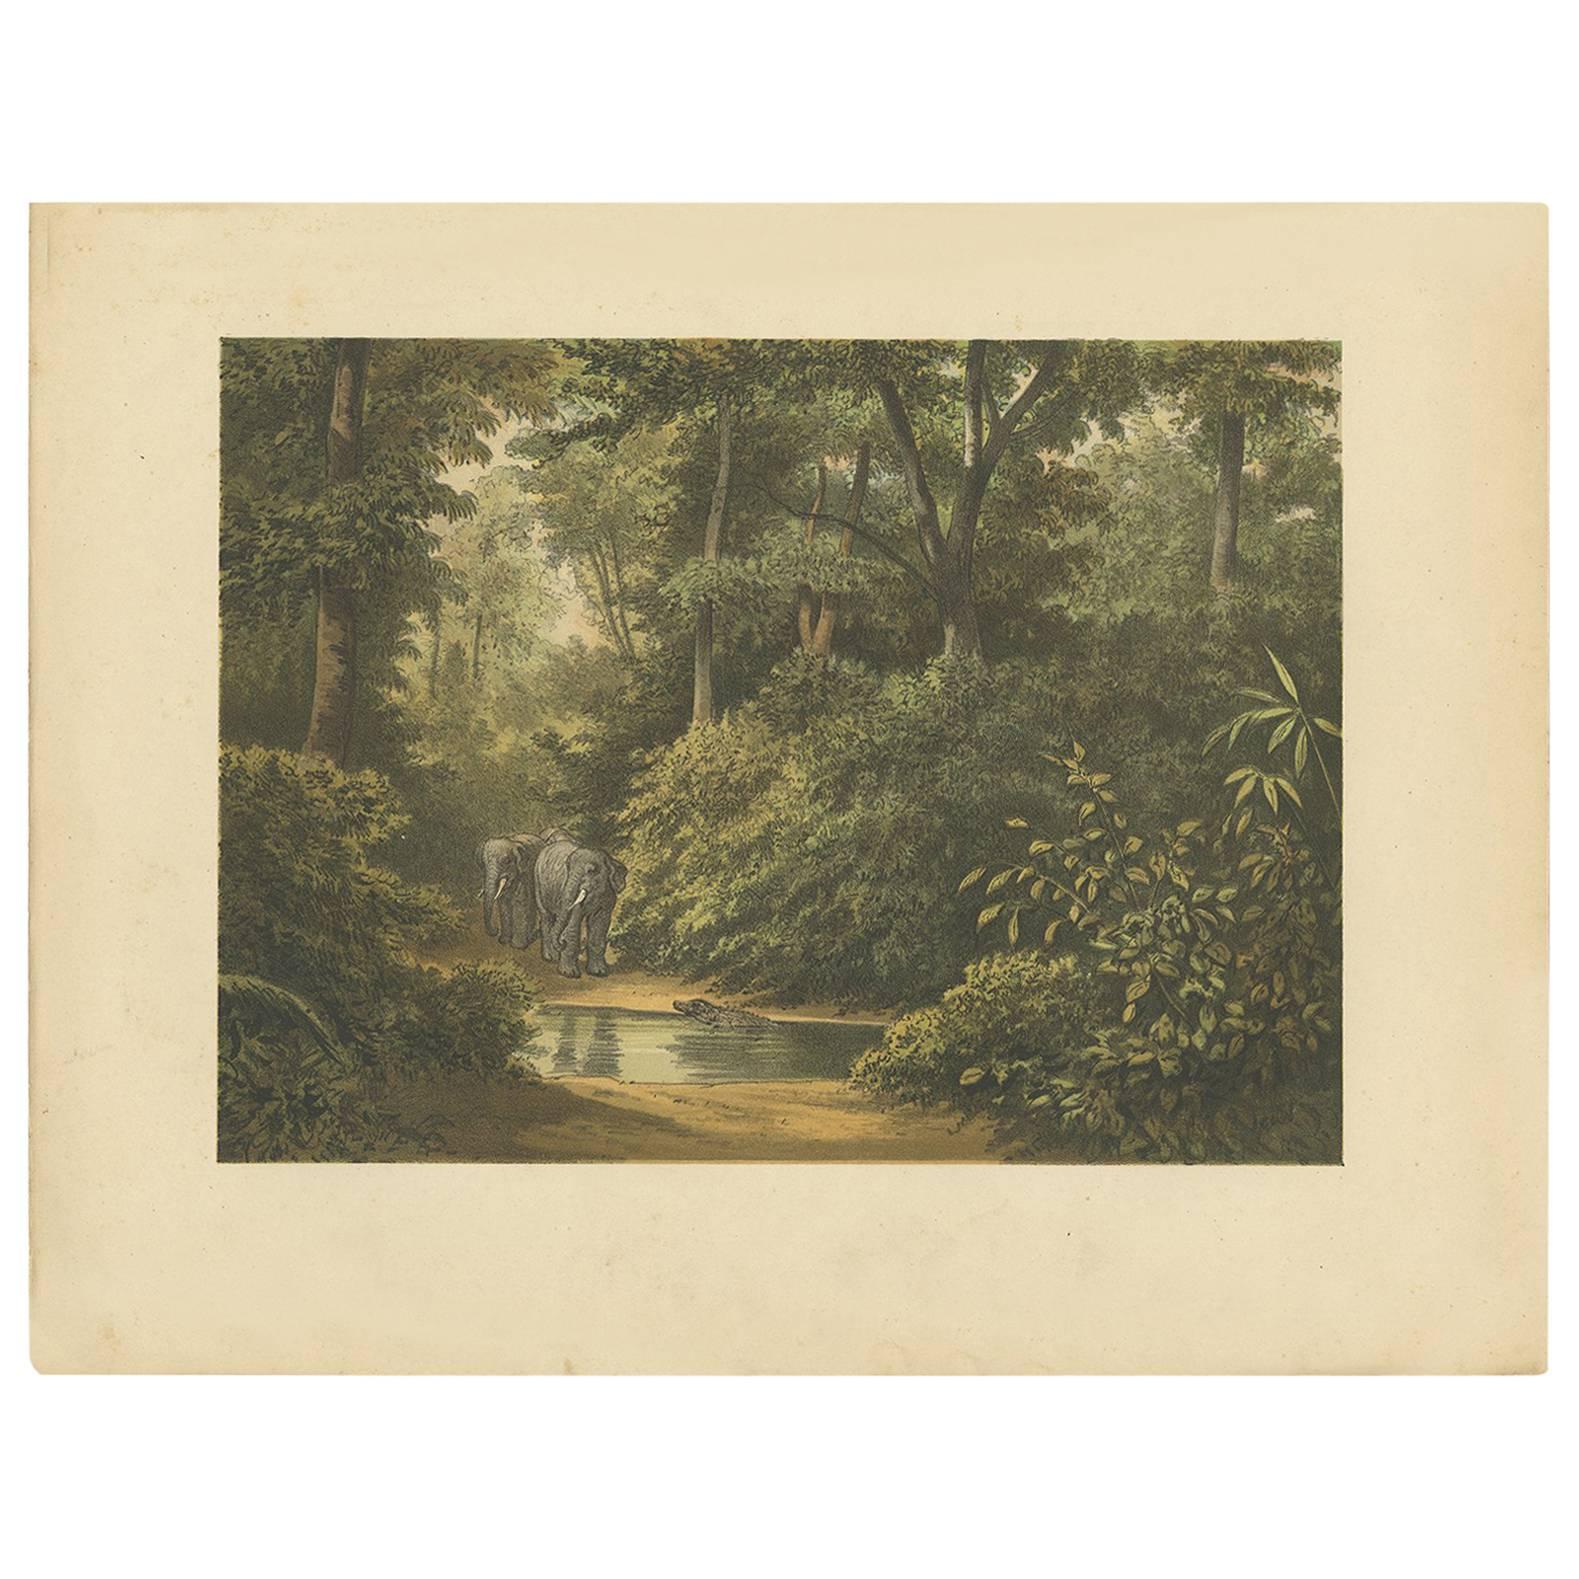 Antique Print of a Forest and Elephants in Indonesia by M.T.H. Perelaer, 1888 For Sale